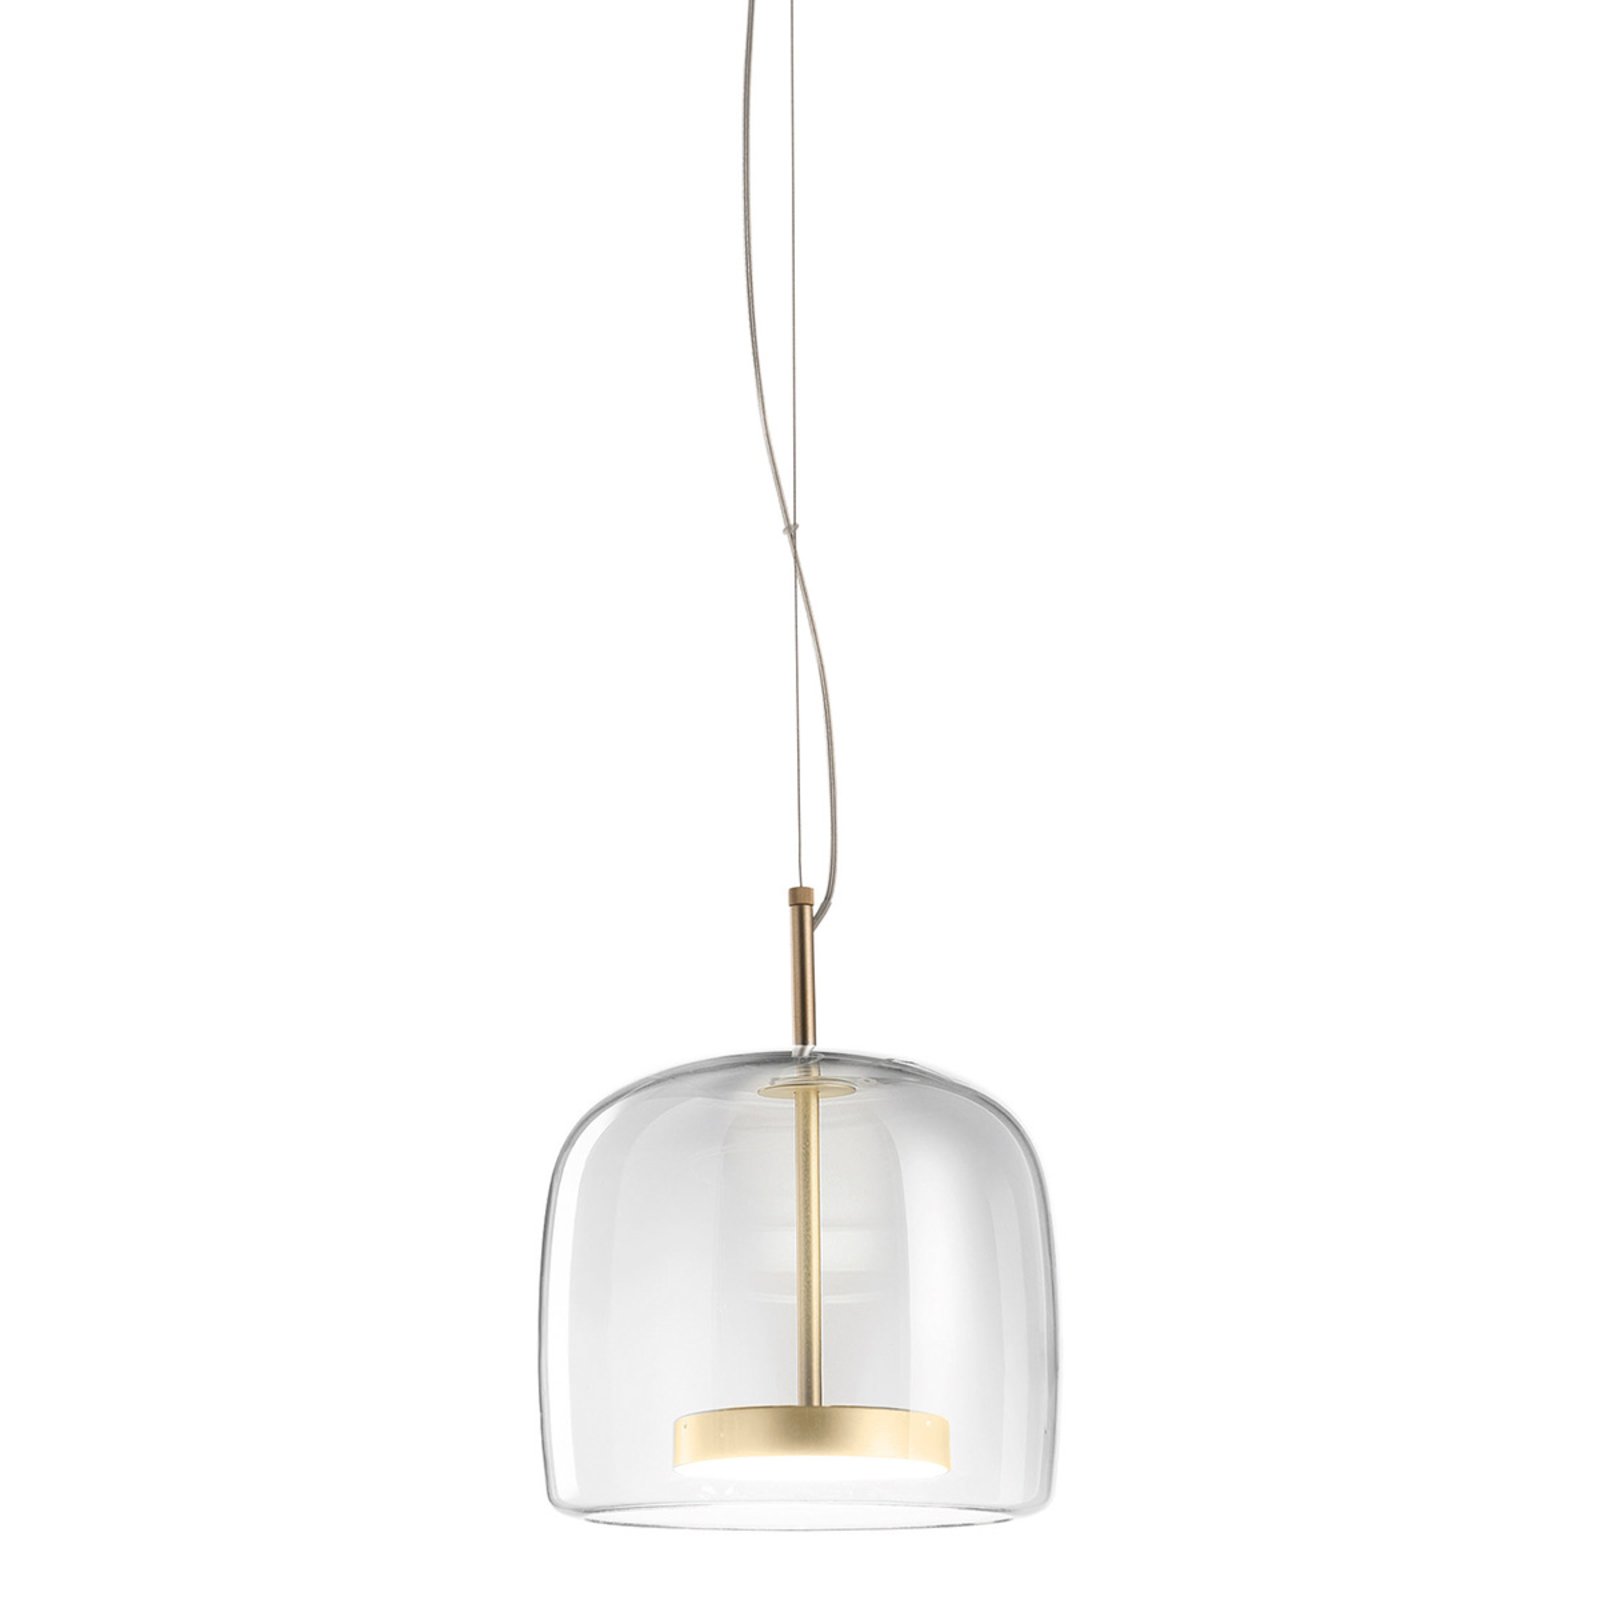 Jube SP 1 P pendant light made of glass, clear